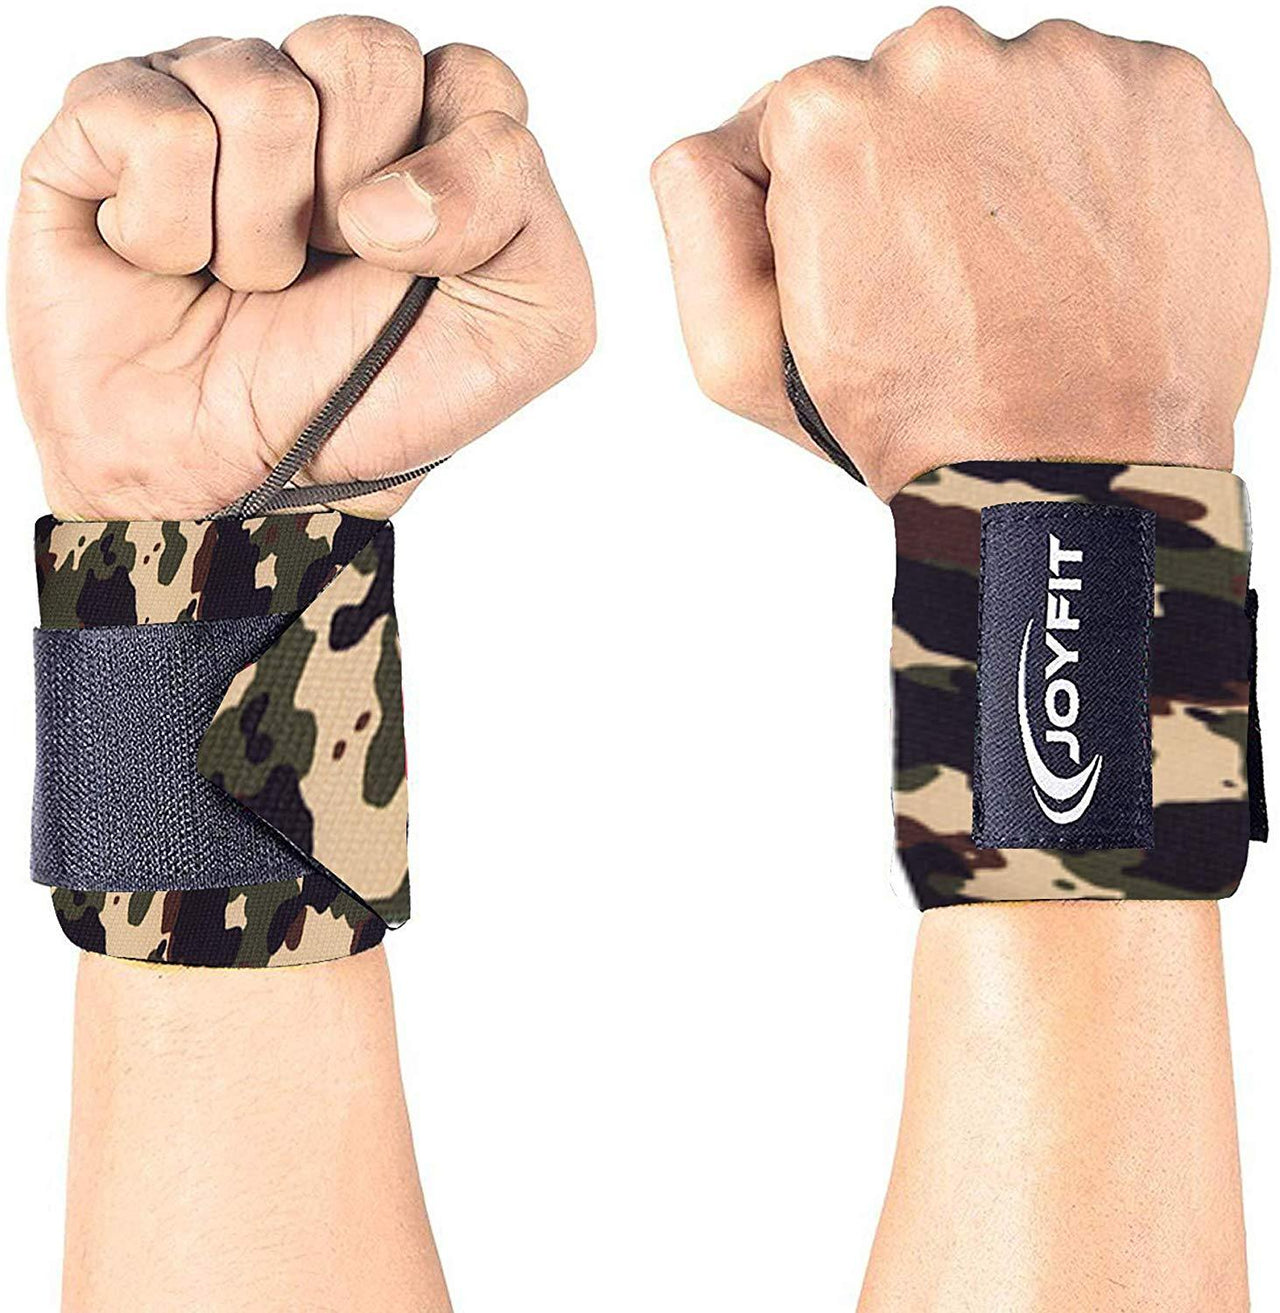 Wrist Wraps for weightlifting